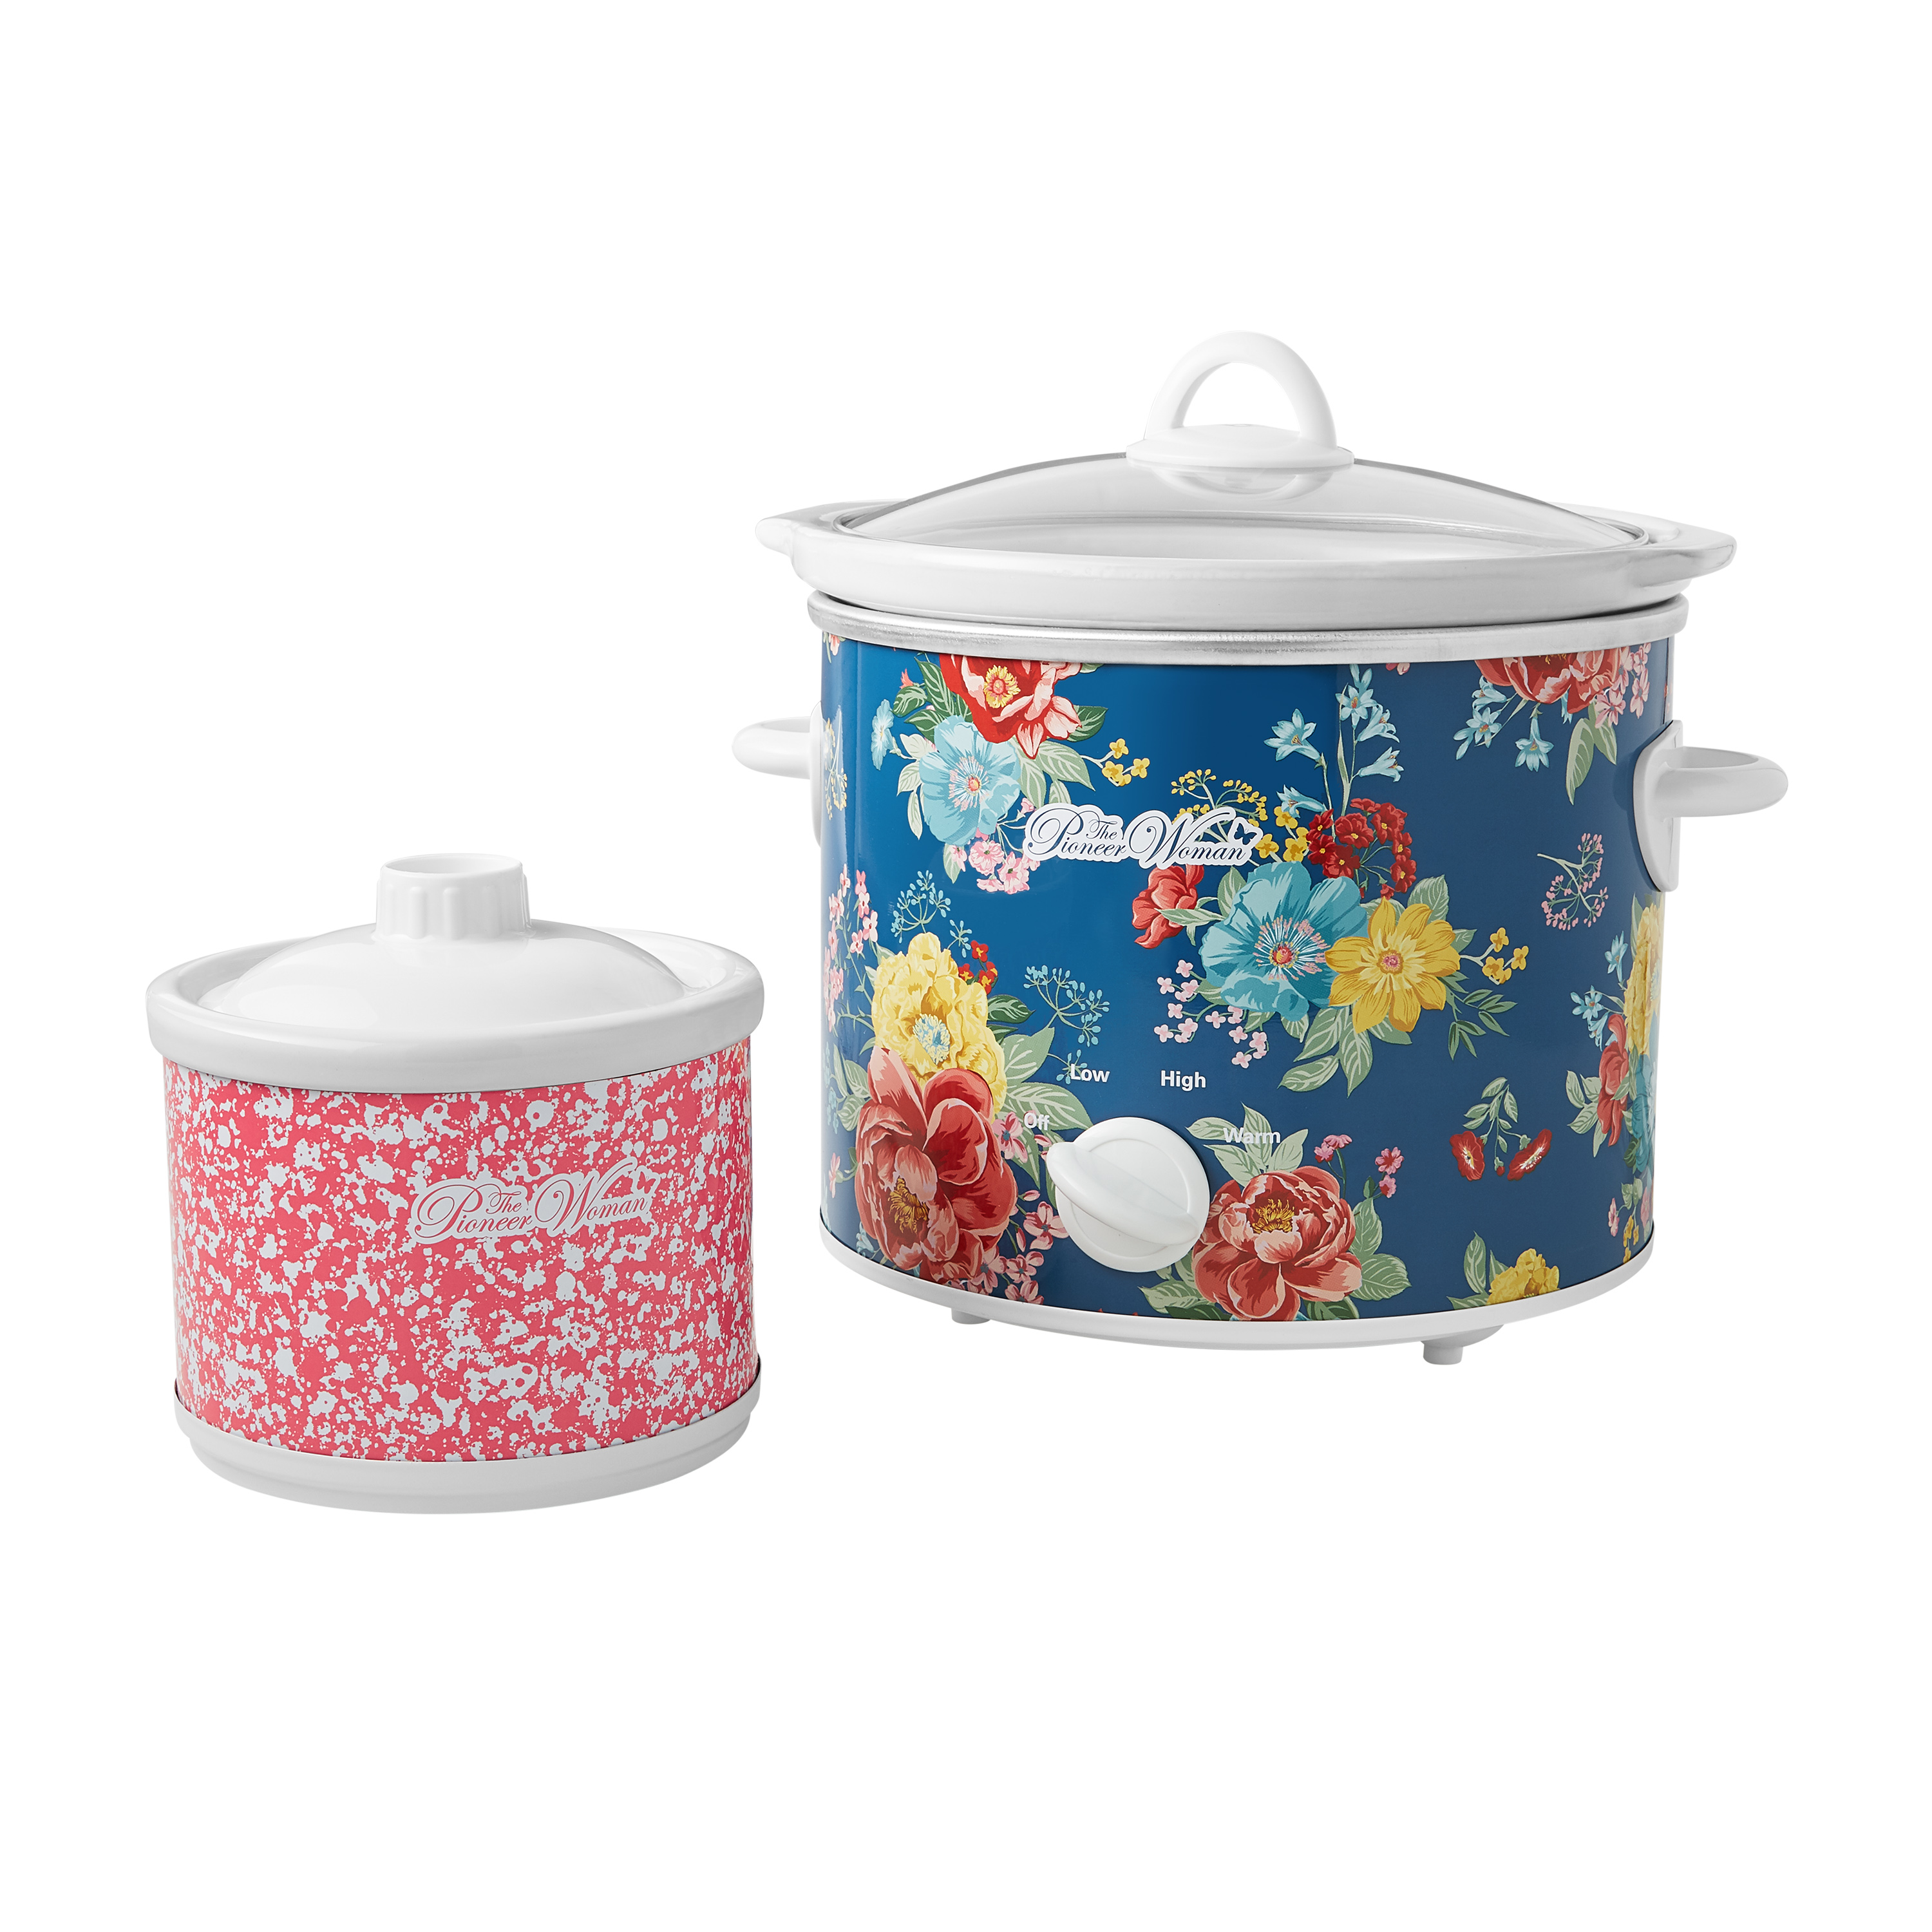 The Pioneer Woman 4-Quart & 0.65-Quart Slow Cookers Set - image 1 of 5